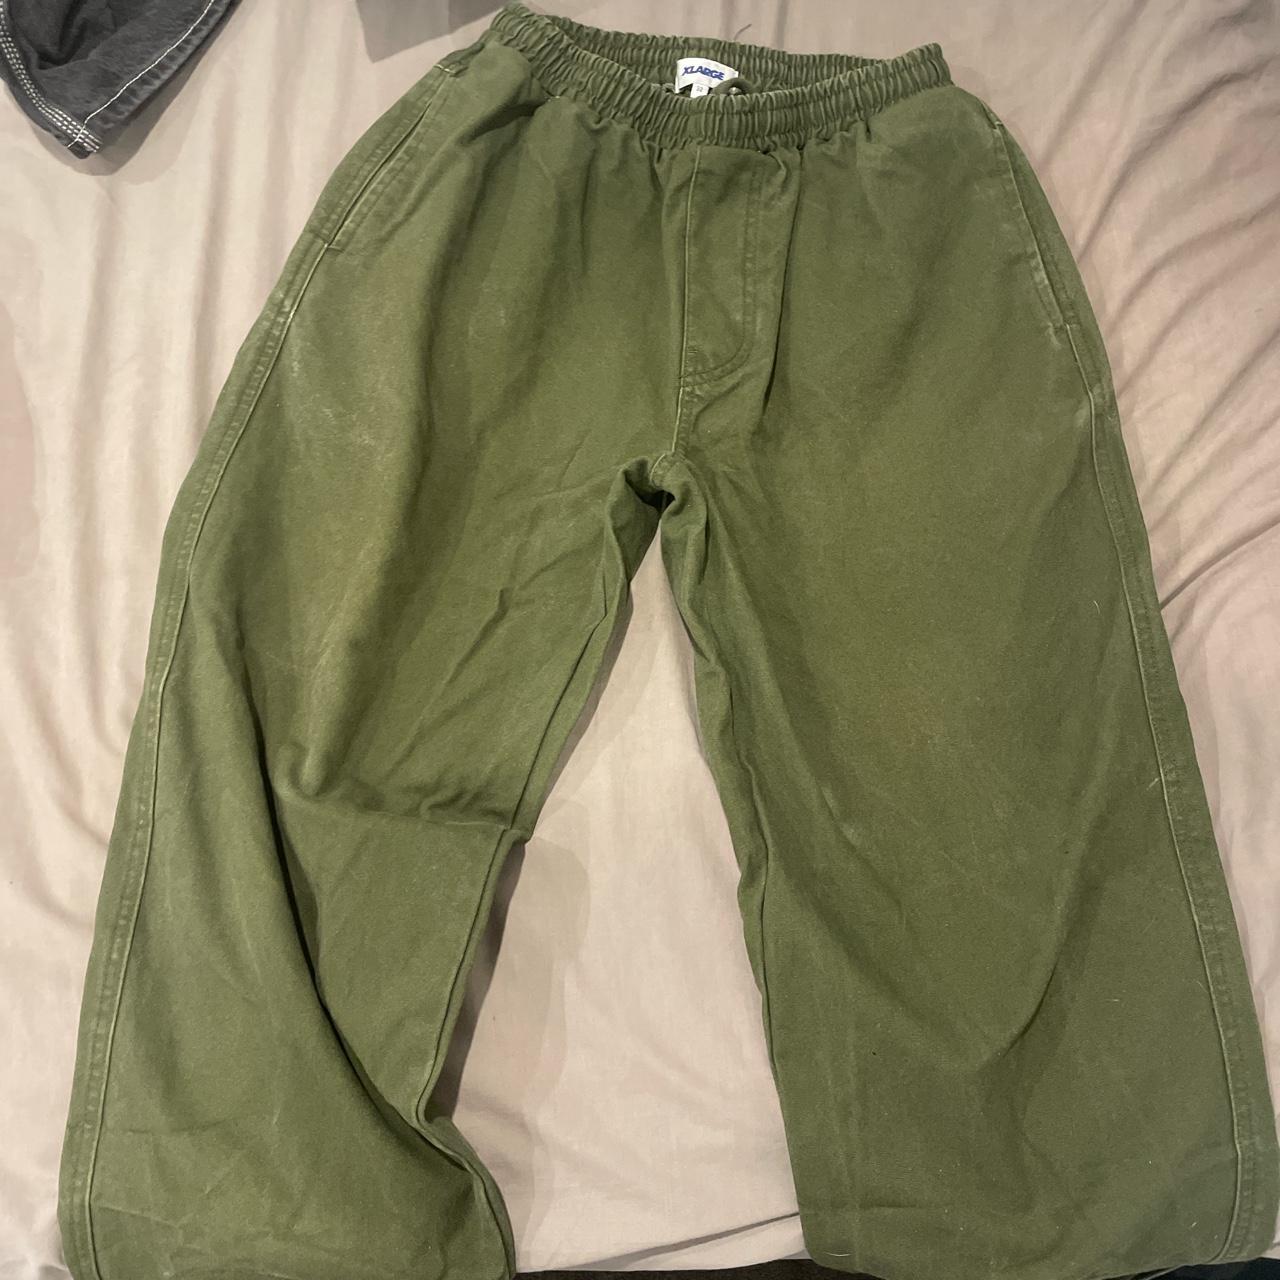 Worn quite a bit but still in very good quality with... - Depop